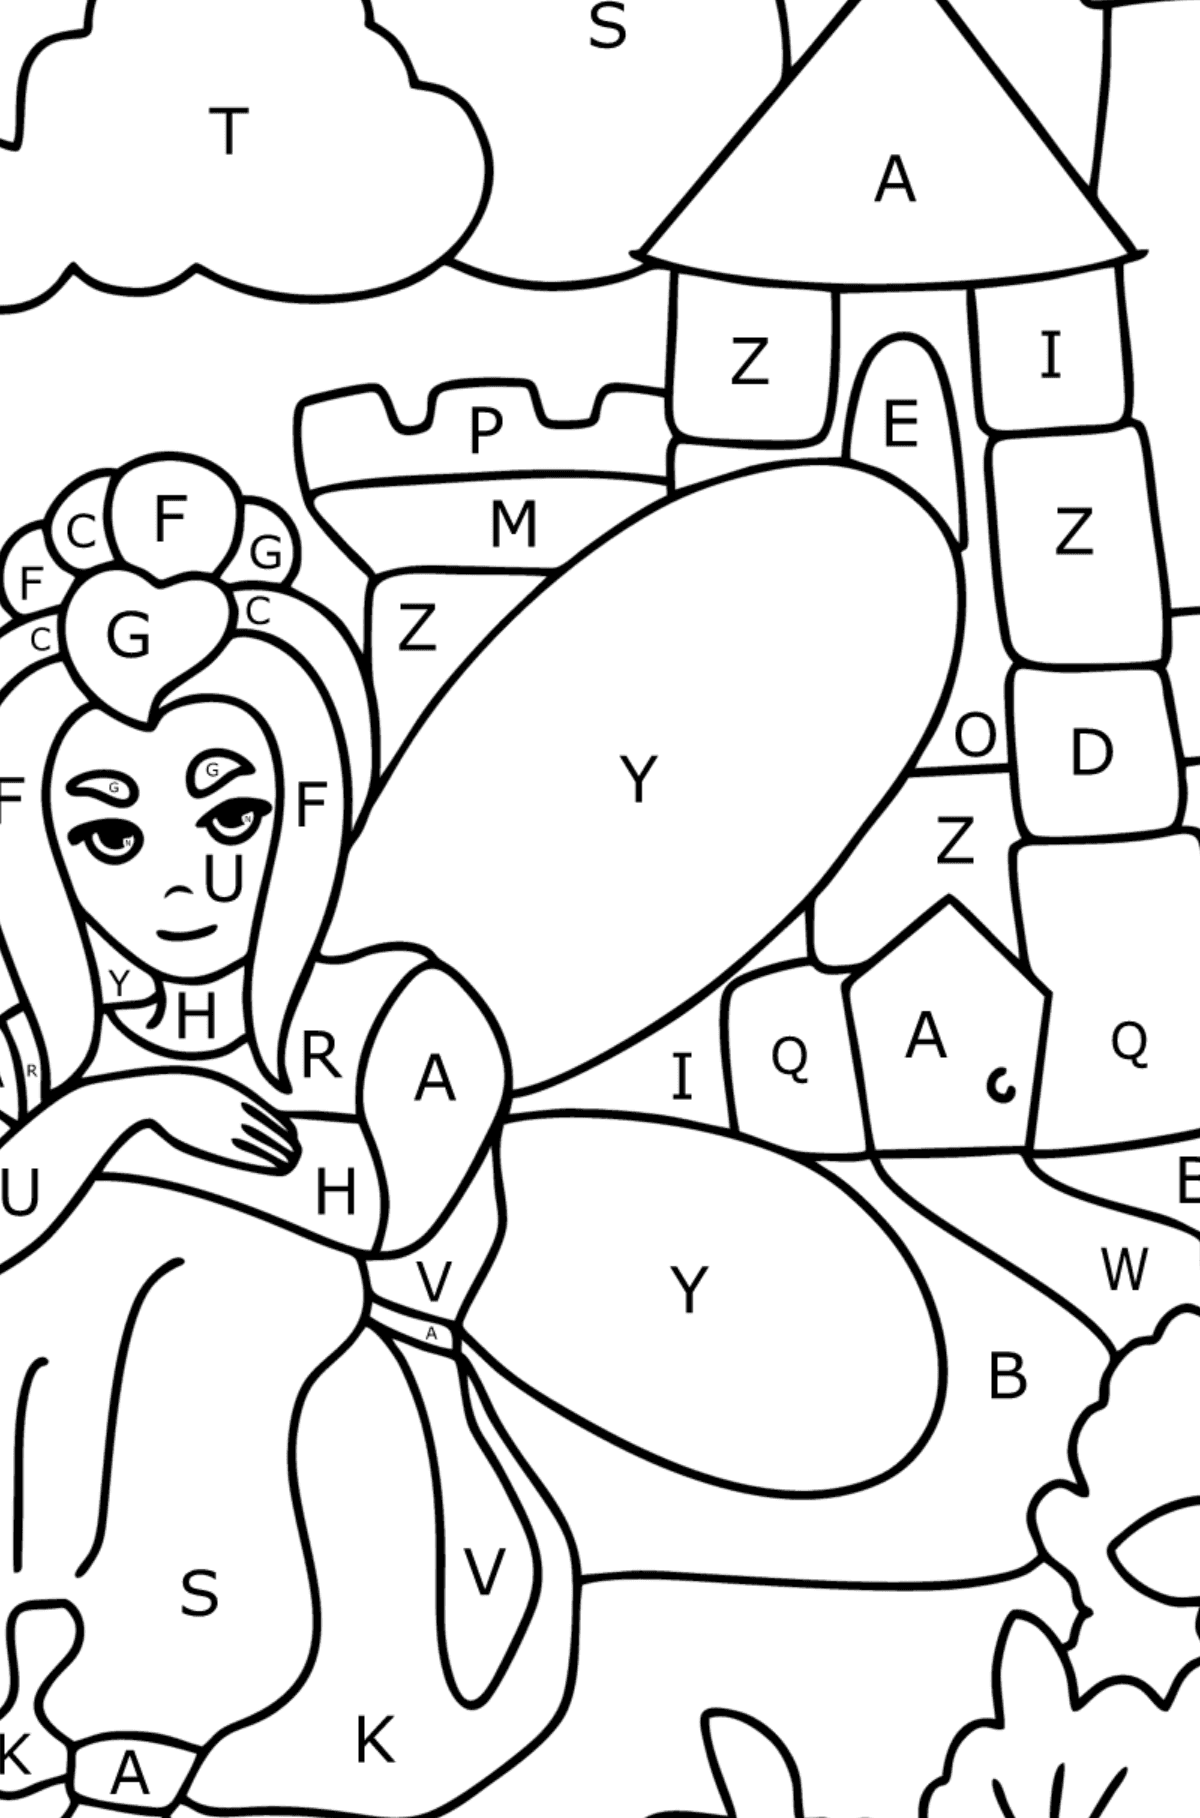 Fairy at the castle coloring page - Coloring by Letters for Kids